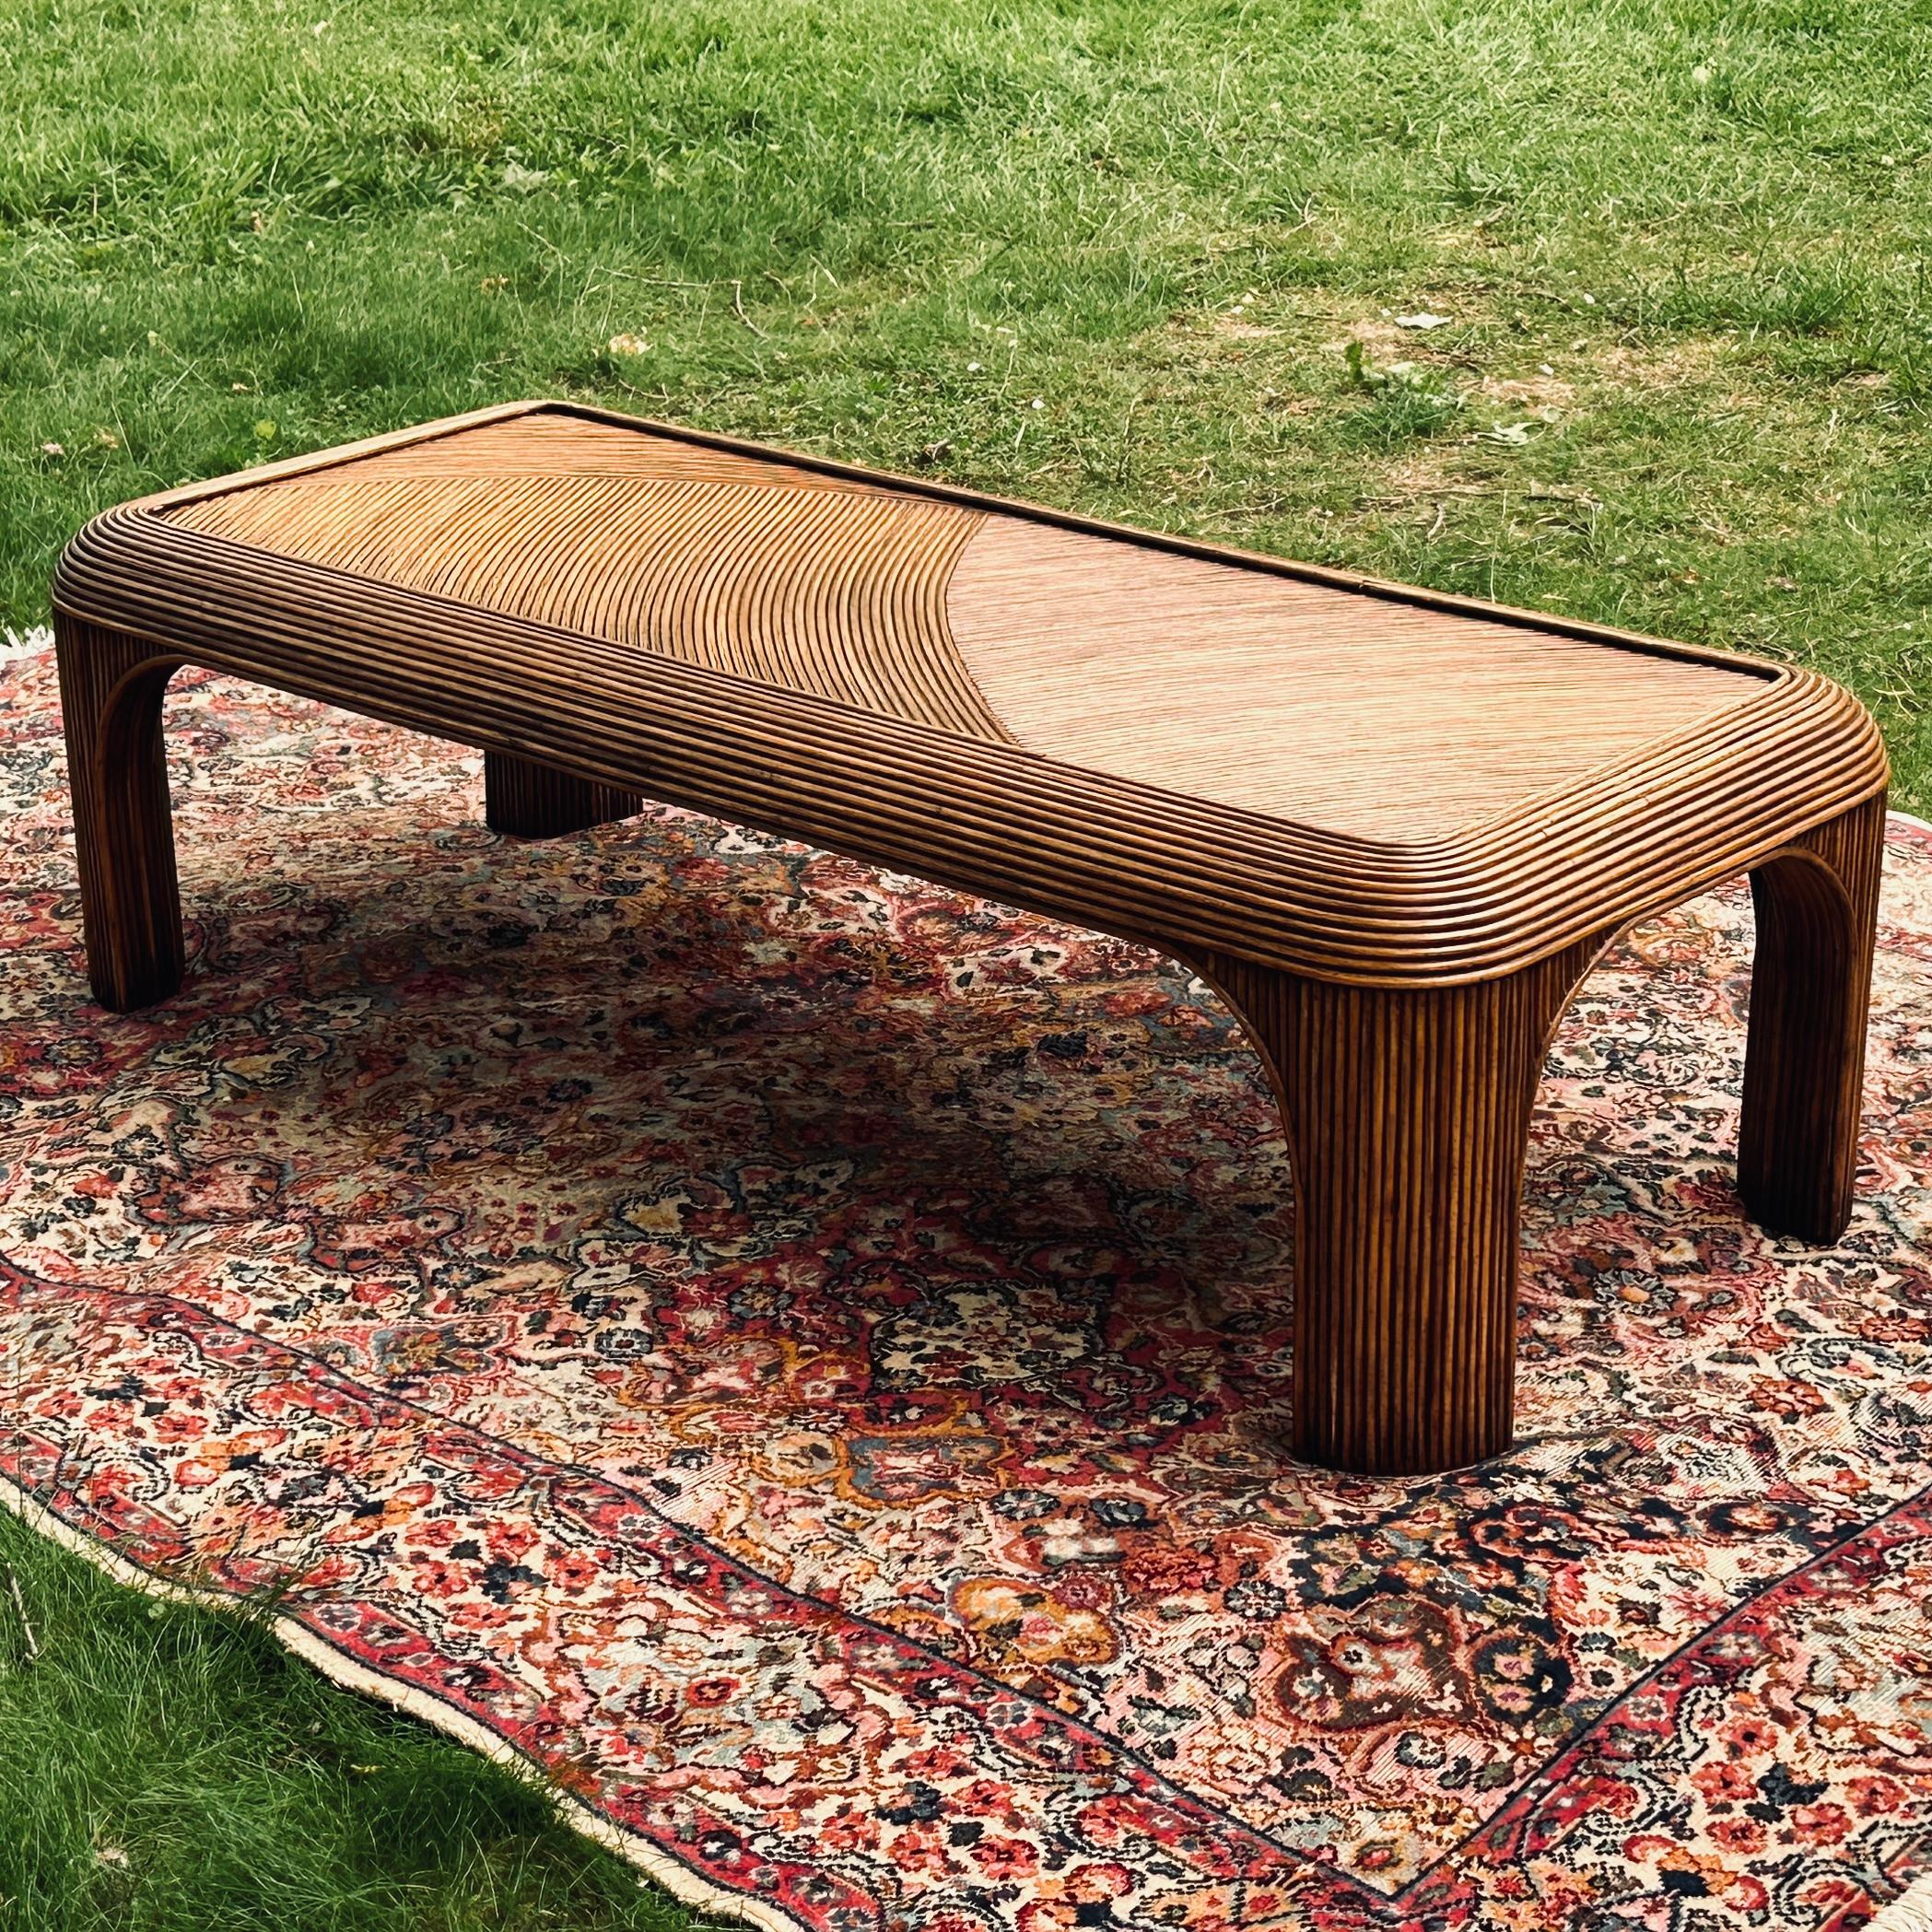 Fantastic vintage pencil reed coffee table. Beautiful swirl design on the top in a classic waterfall shape. Acquired from a Main Line estate. Can be used with or without the inset glass glass surface measuring roughly 19” x 49”